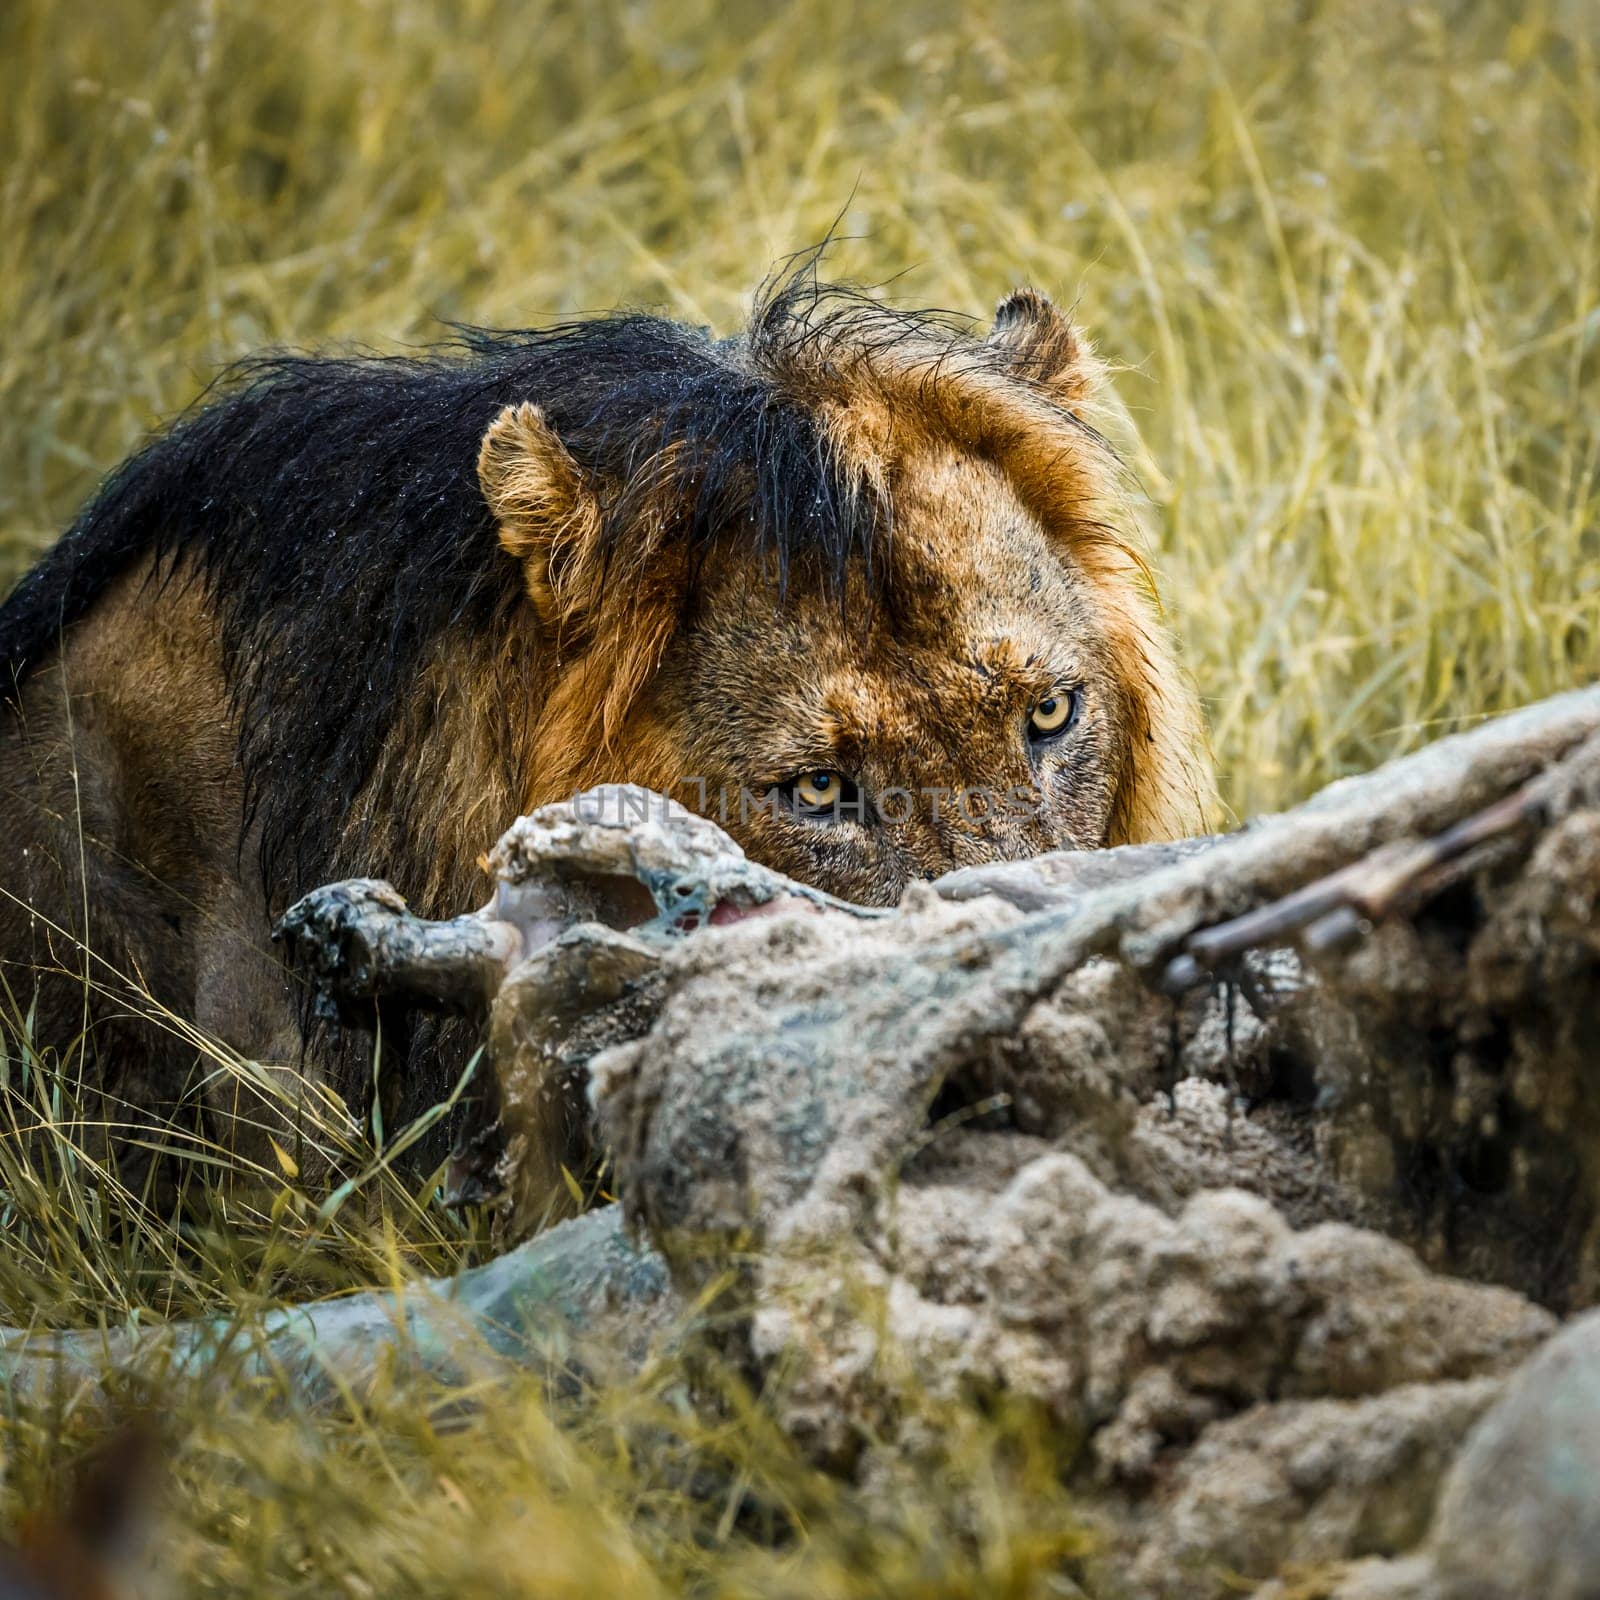 African lion in Kruger national park, South Africa by PACOCOMO